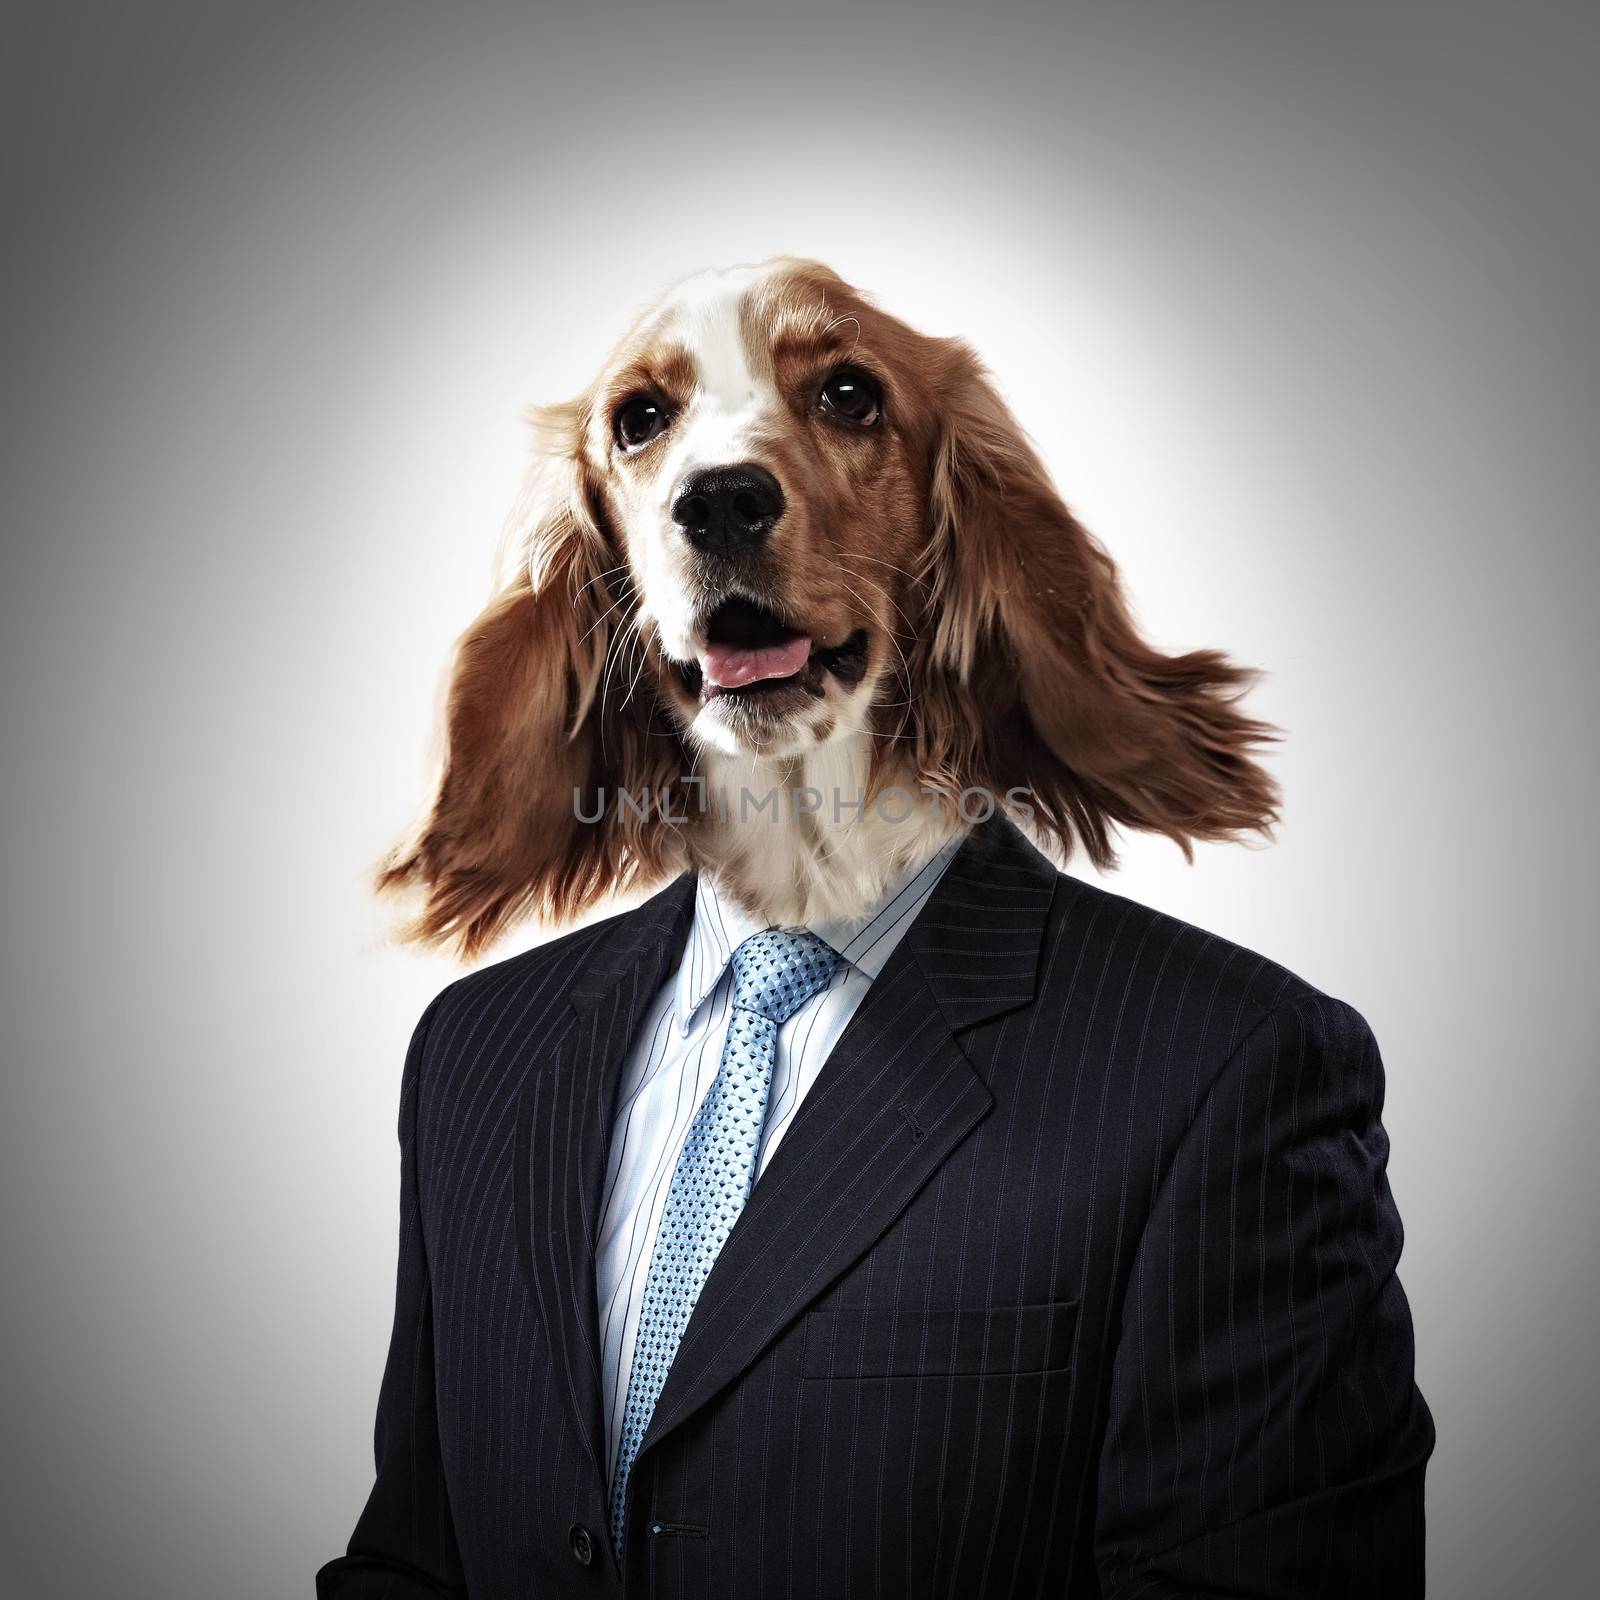 Funny portrait of a dog in a suit on an abstract background. Collage.